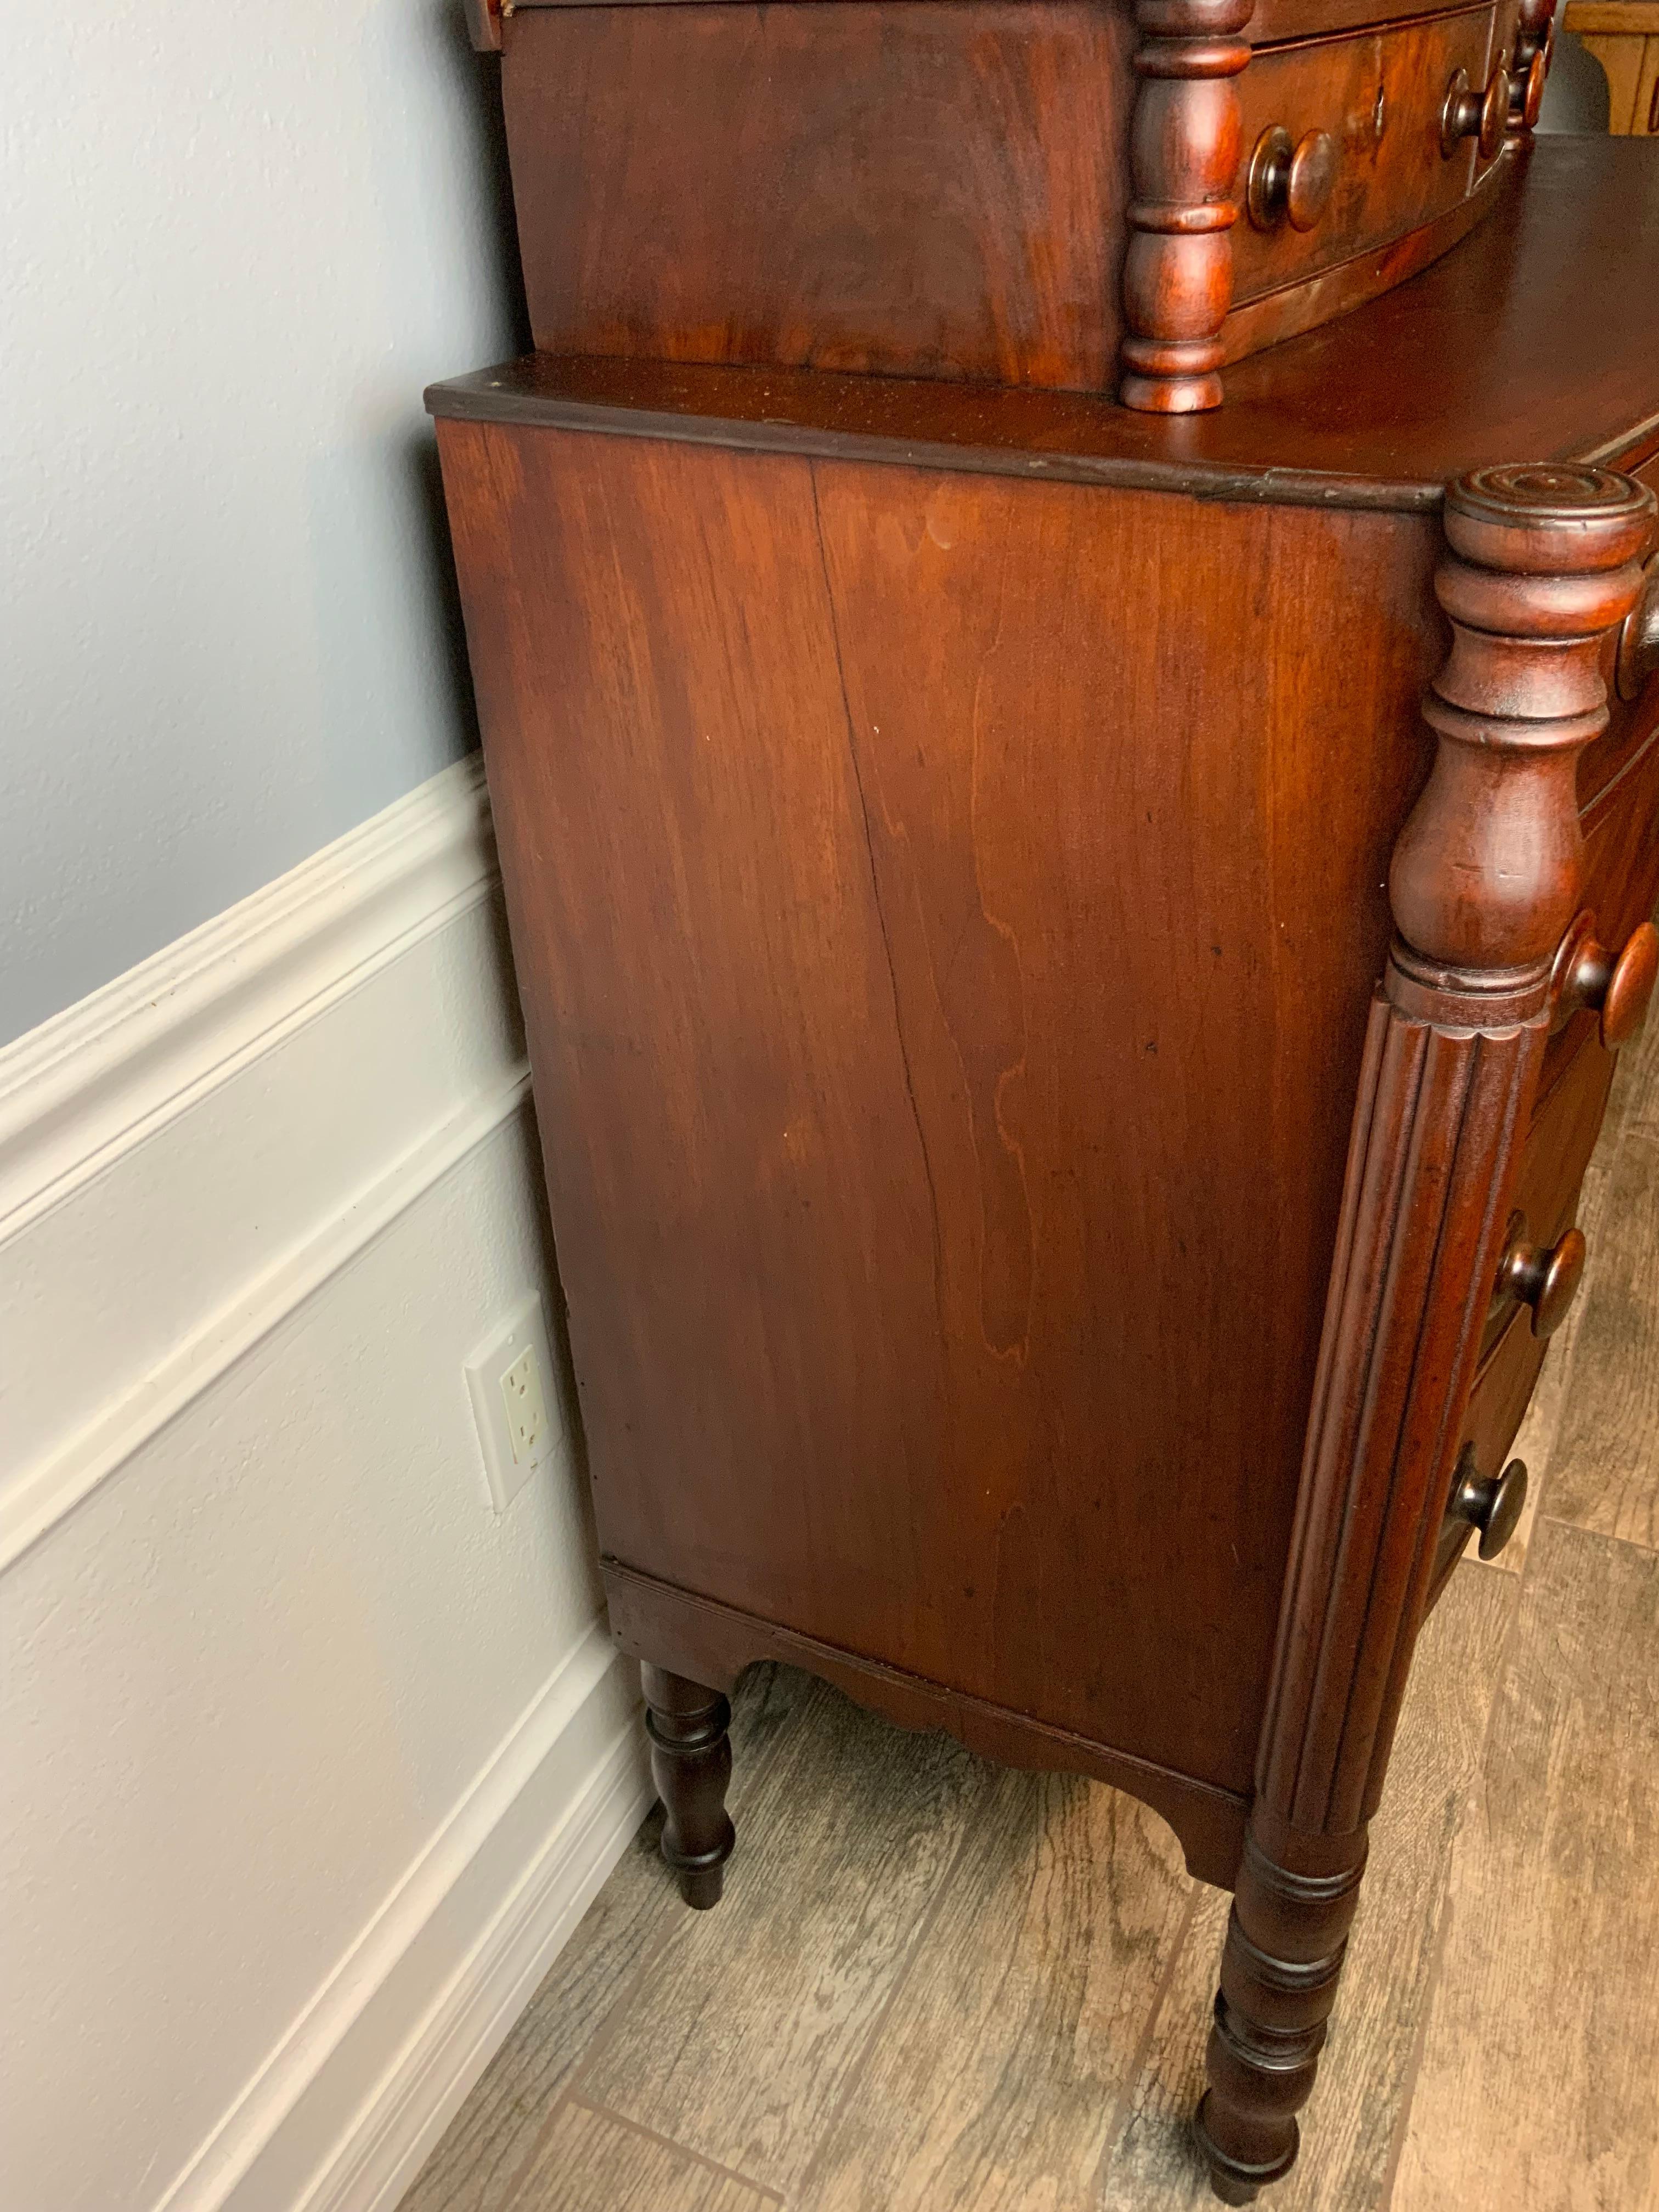 One of the cleanest and most original American Sheraton chests we’ve had.   This piece is in its original finish and retains all the original working locks and drawer pulls.  Excellent color and aged patina to the lightly crazed varnish surface.